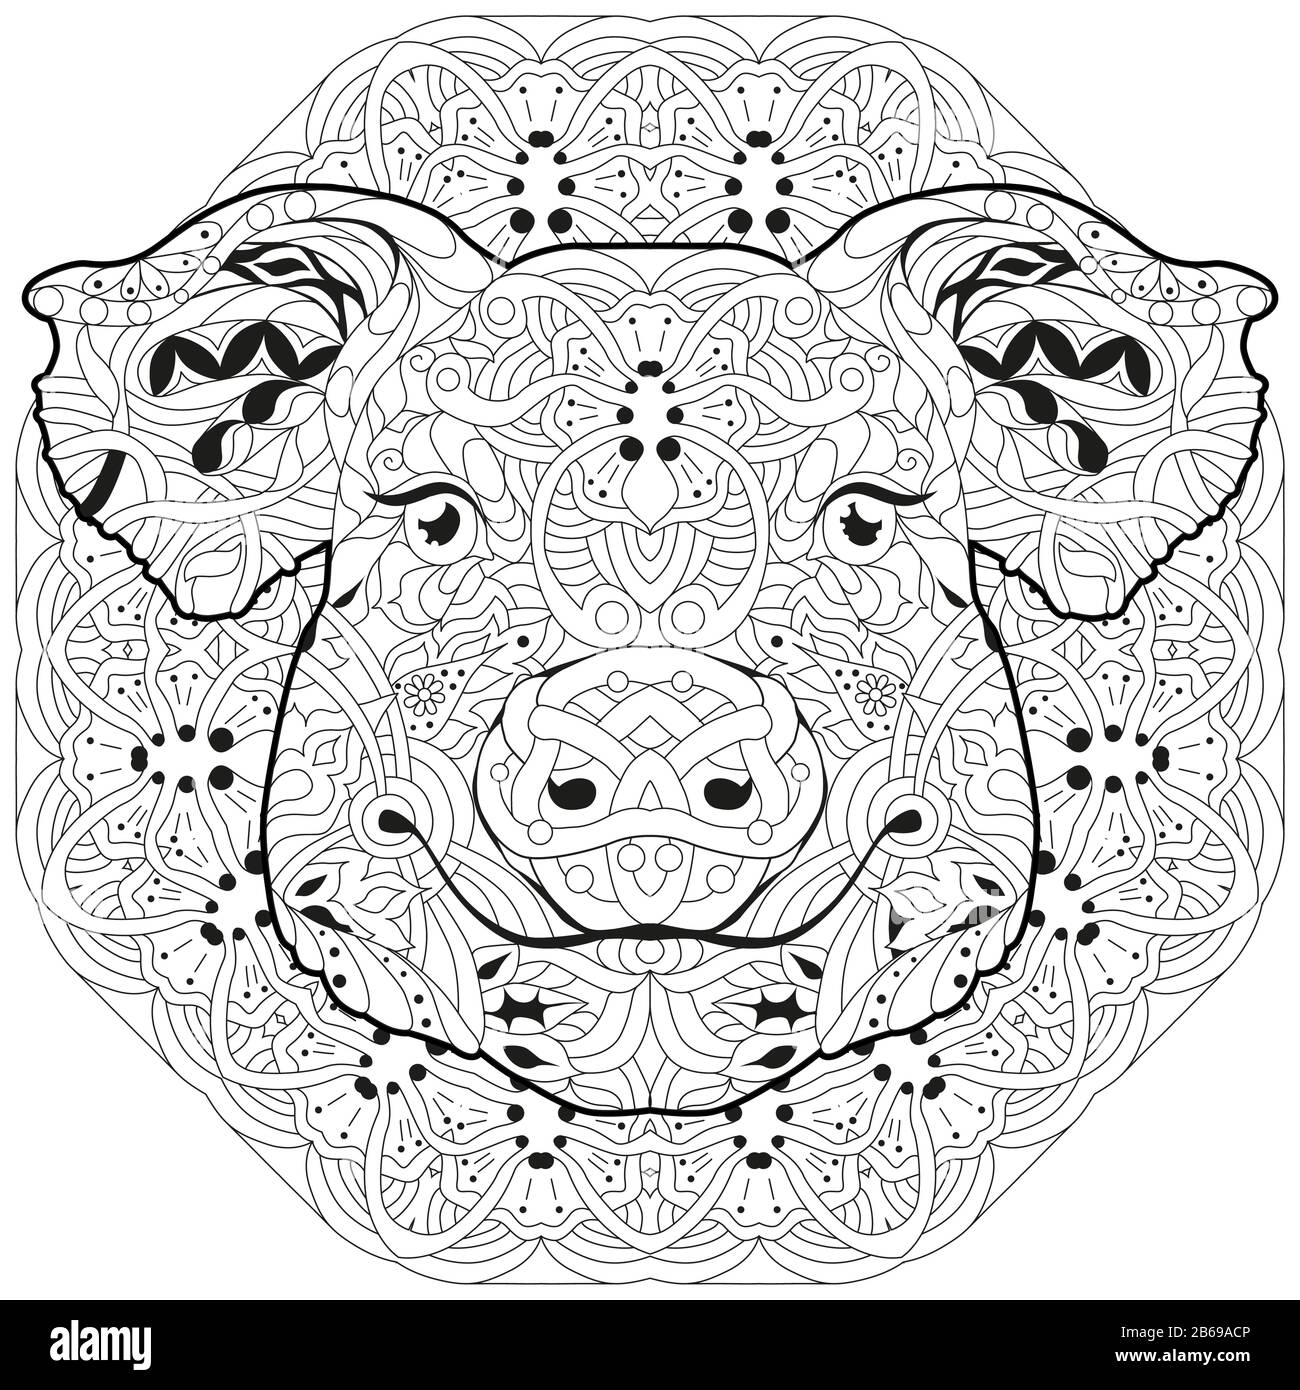 Zentangle pig head with mandala. Hand drawn decorative vector illustration for coloring Stock Vector